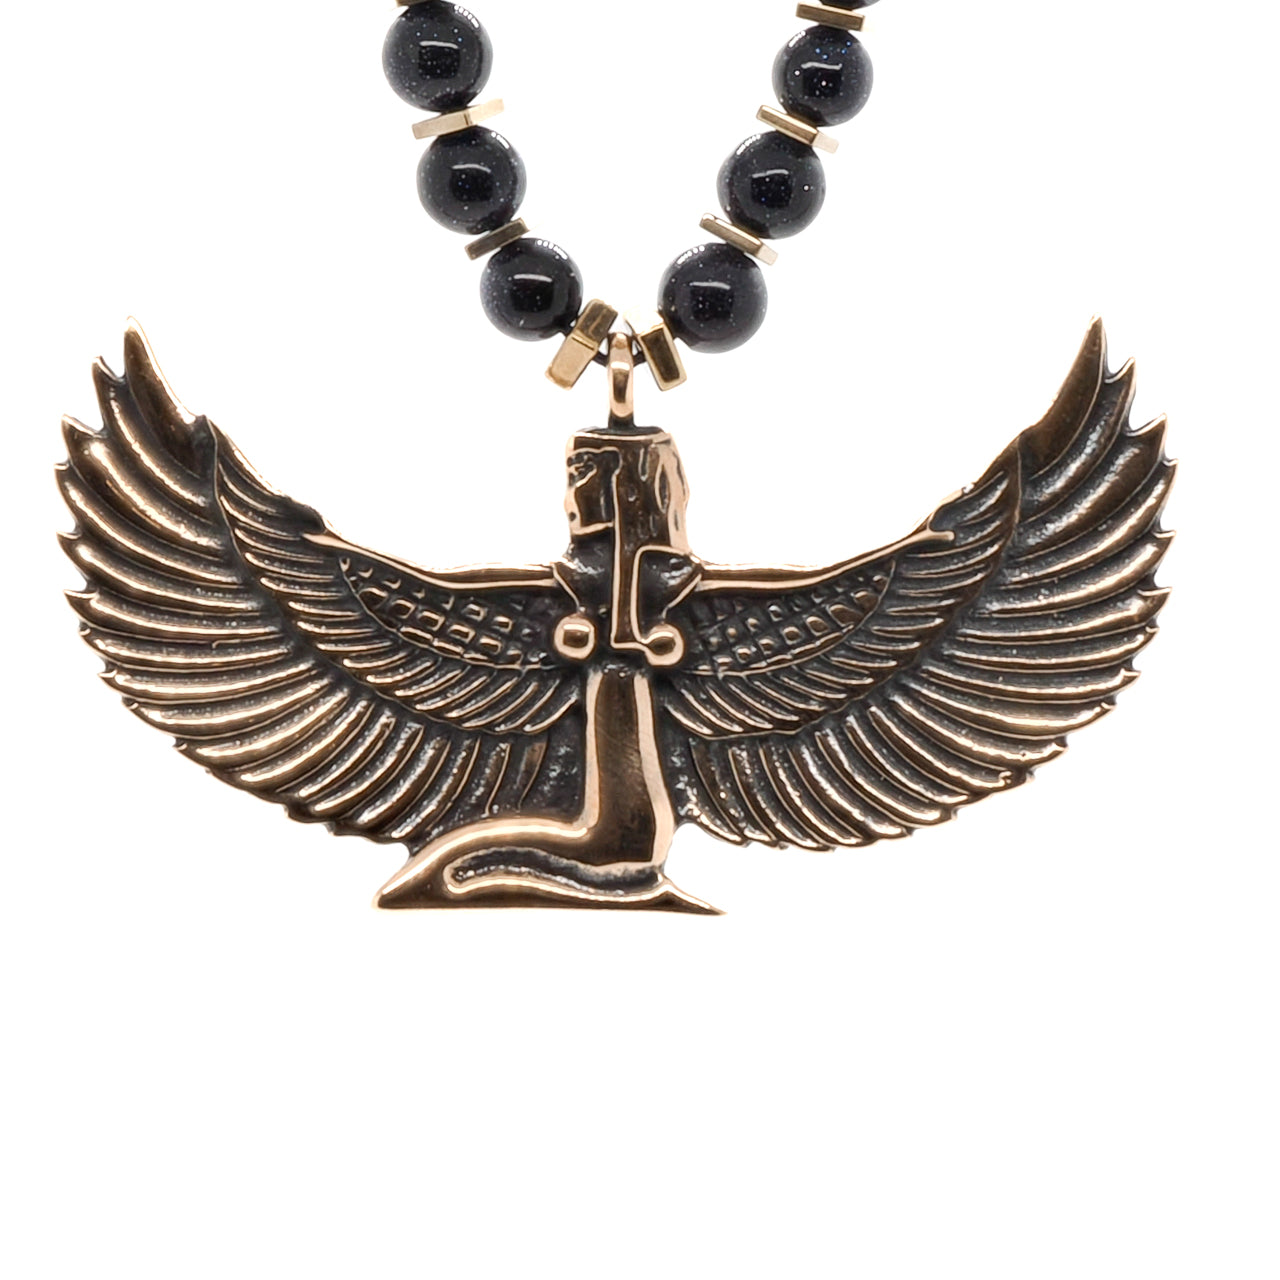 Unique Handmade Necklace with Goddess Isis Pendant and Sand Star Stone Beads, a symbol of healing and magic.